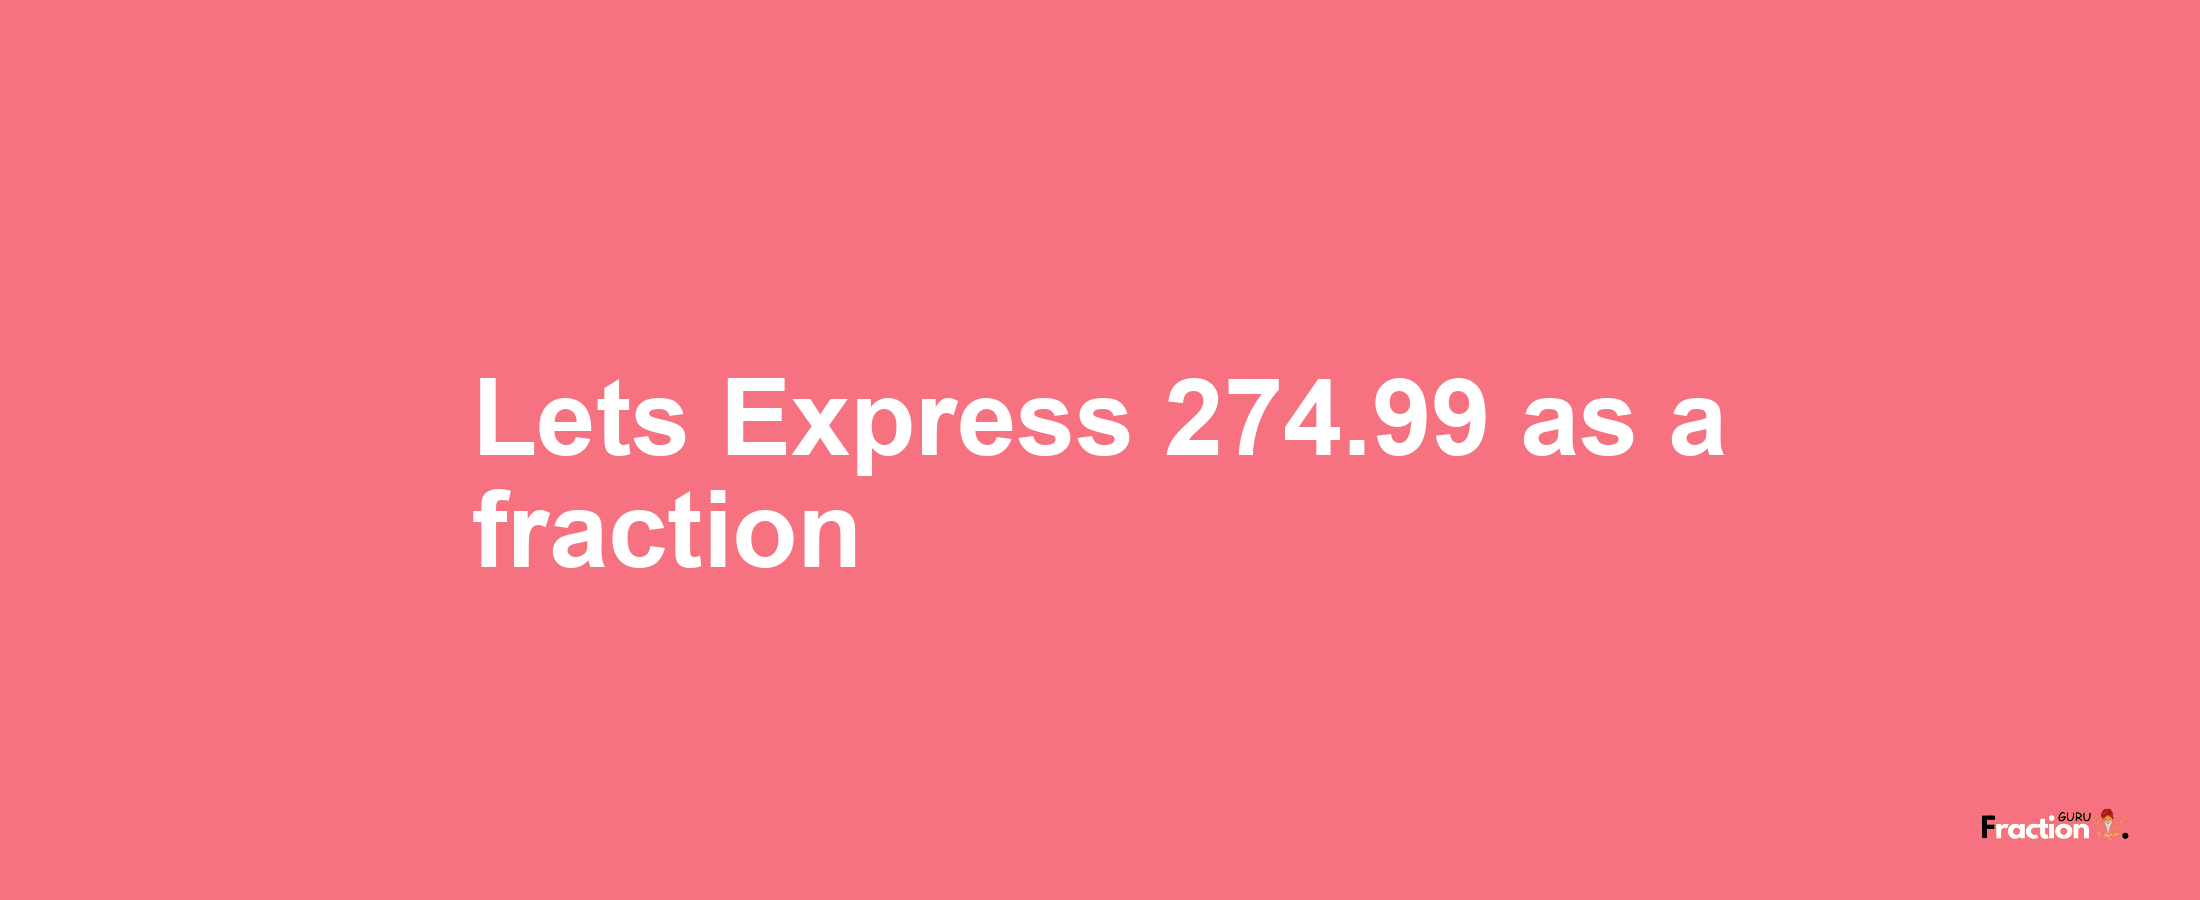 Lets Express 274.99 as afraction